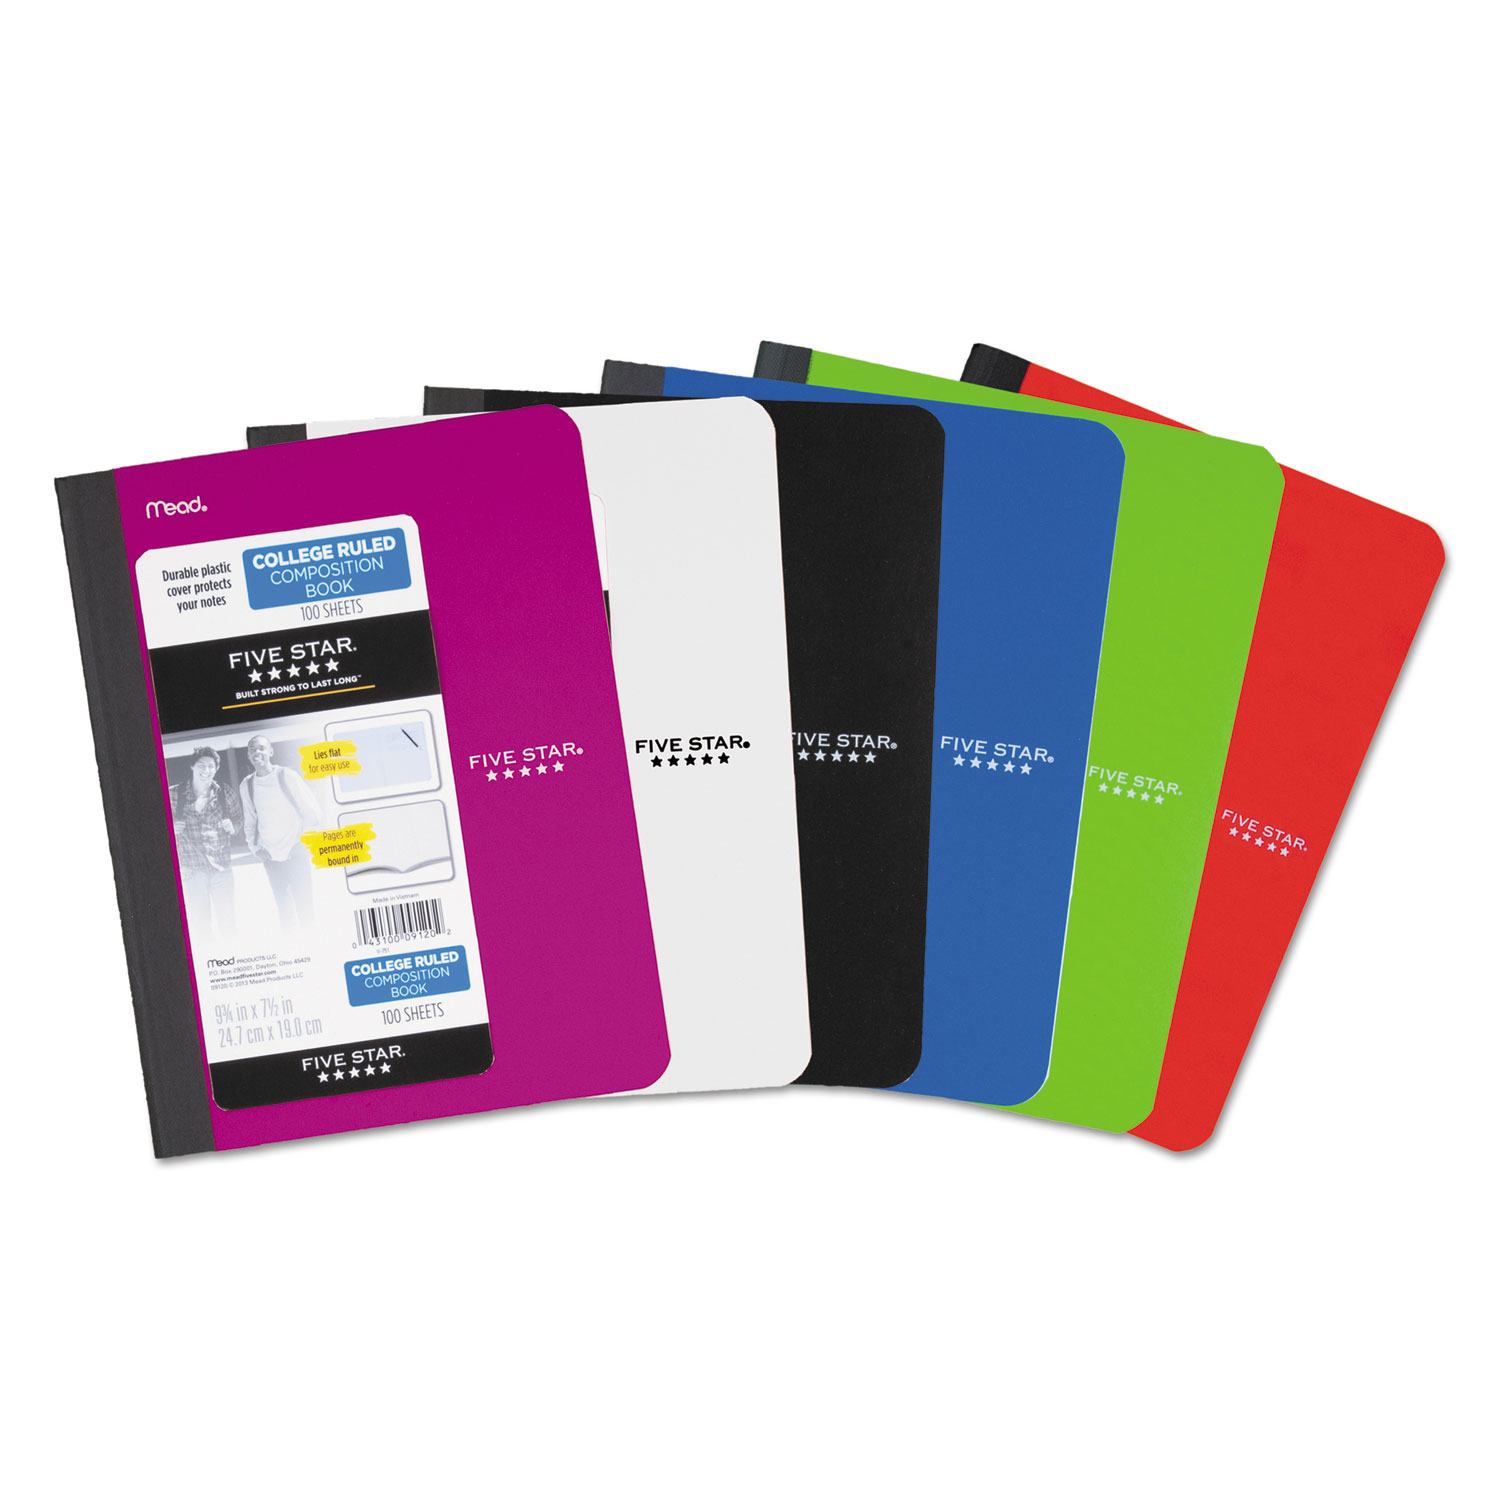  Five Star 09120 Composition Book, Medium/College Rule, Assorted Cover Colors, 9.75 x 7.5, 100 Sheets (MEA09120) 